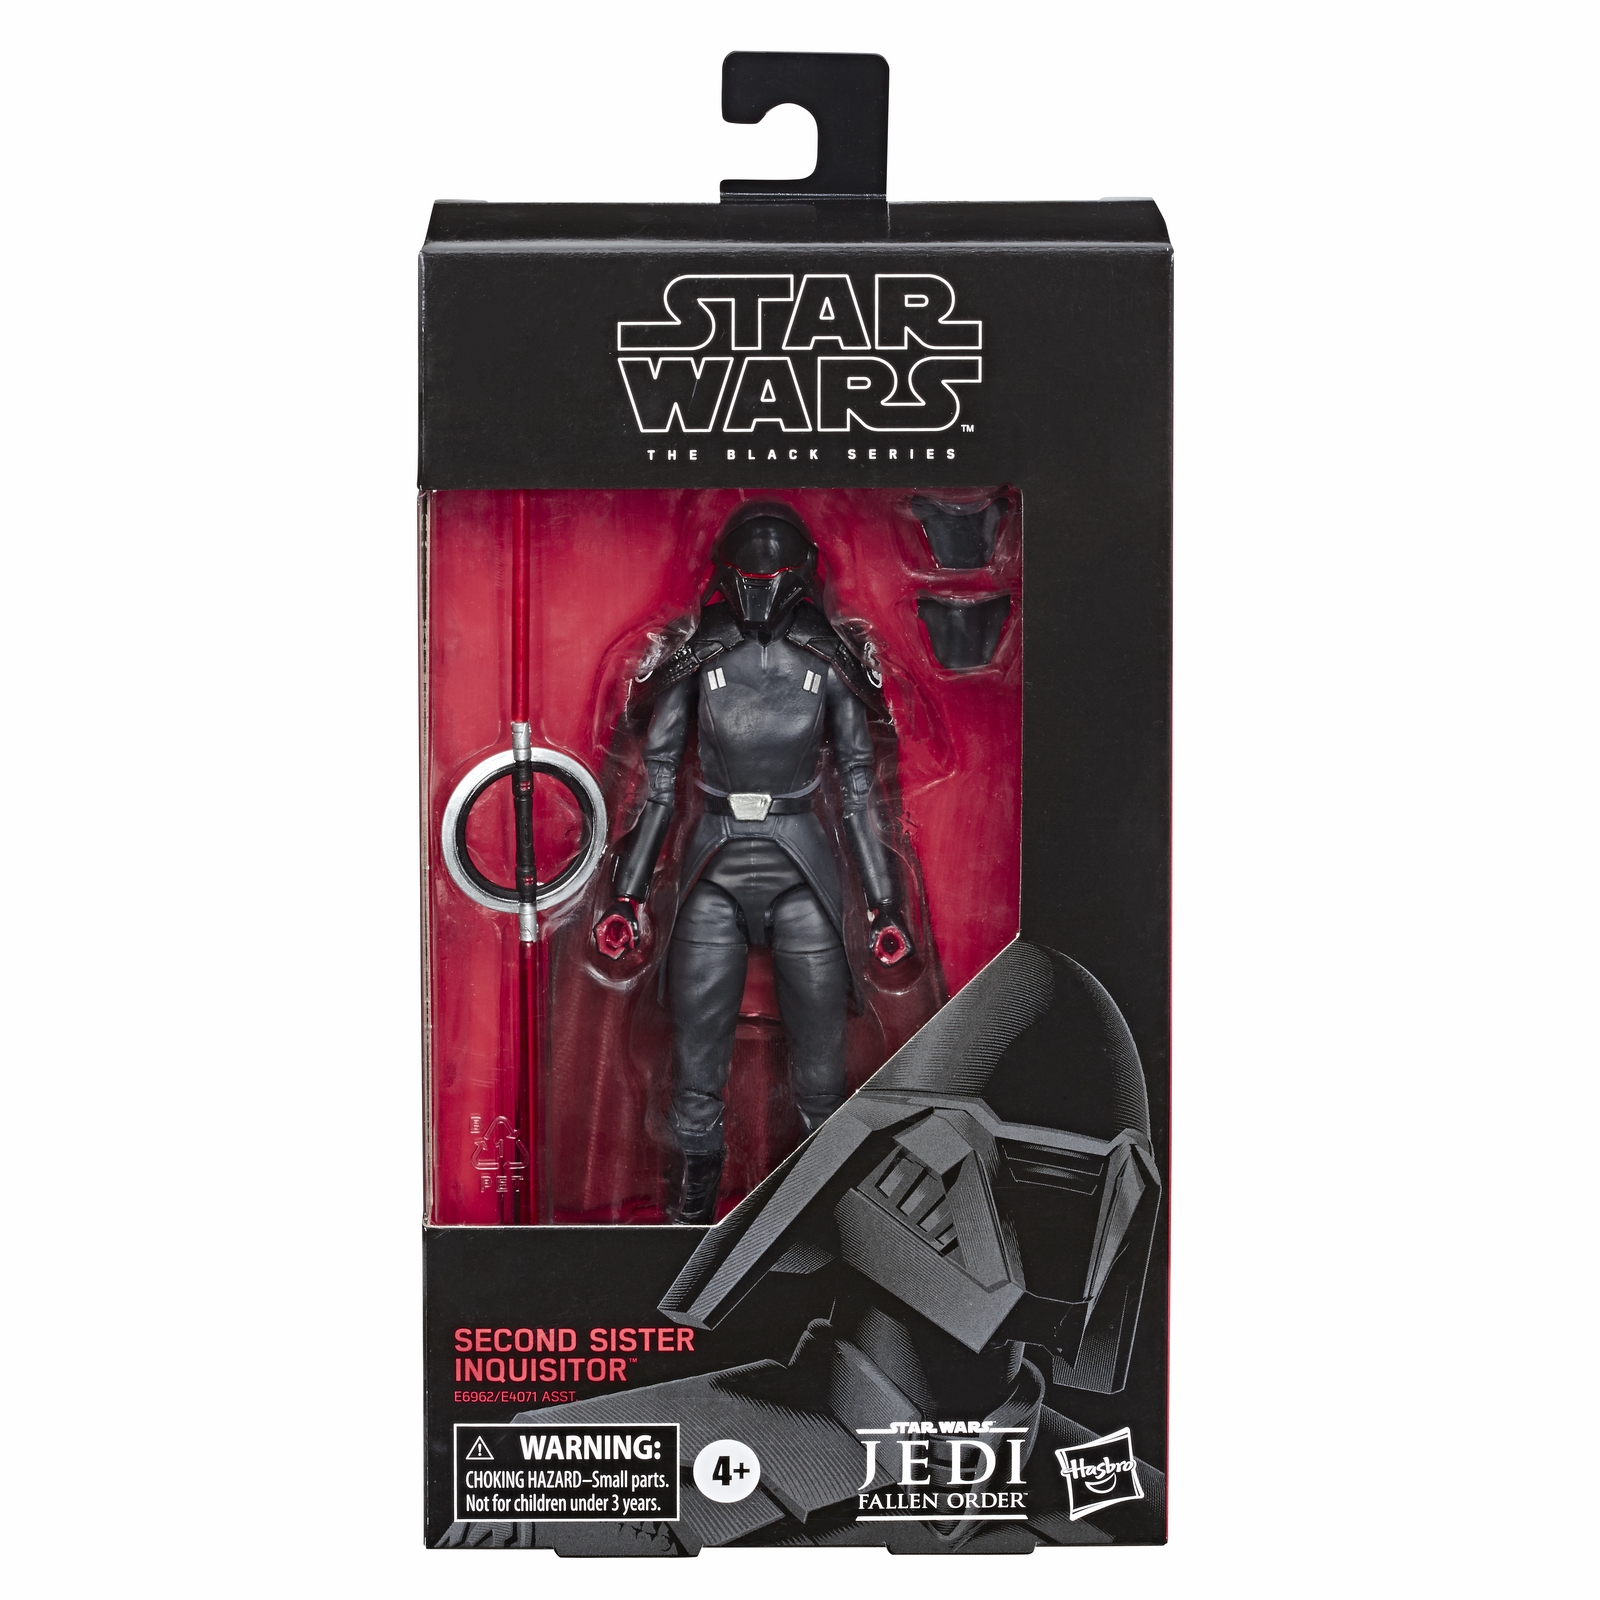 STAR WARS THE BLACK SERIES 6-INCH SECOND SISTER INQUISITOR Figure - in pck.jpg